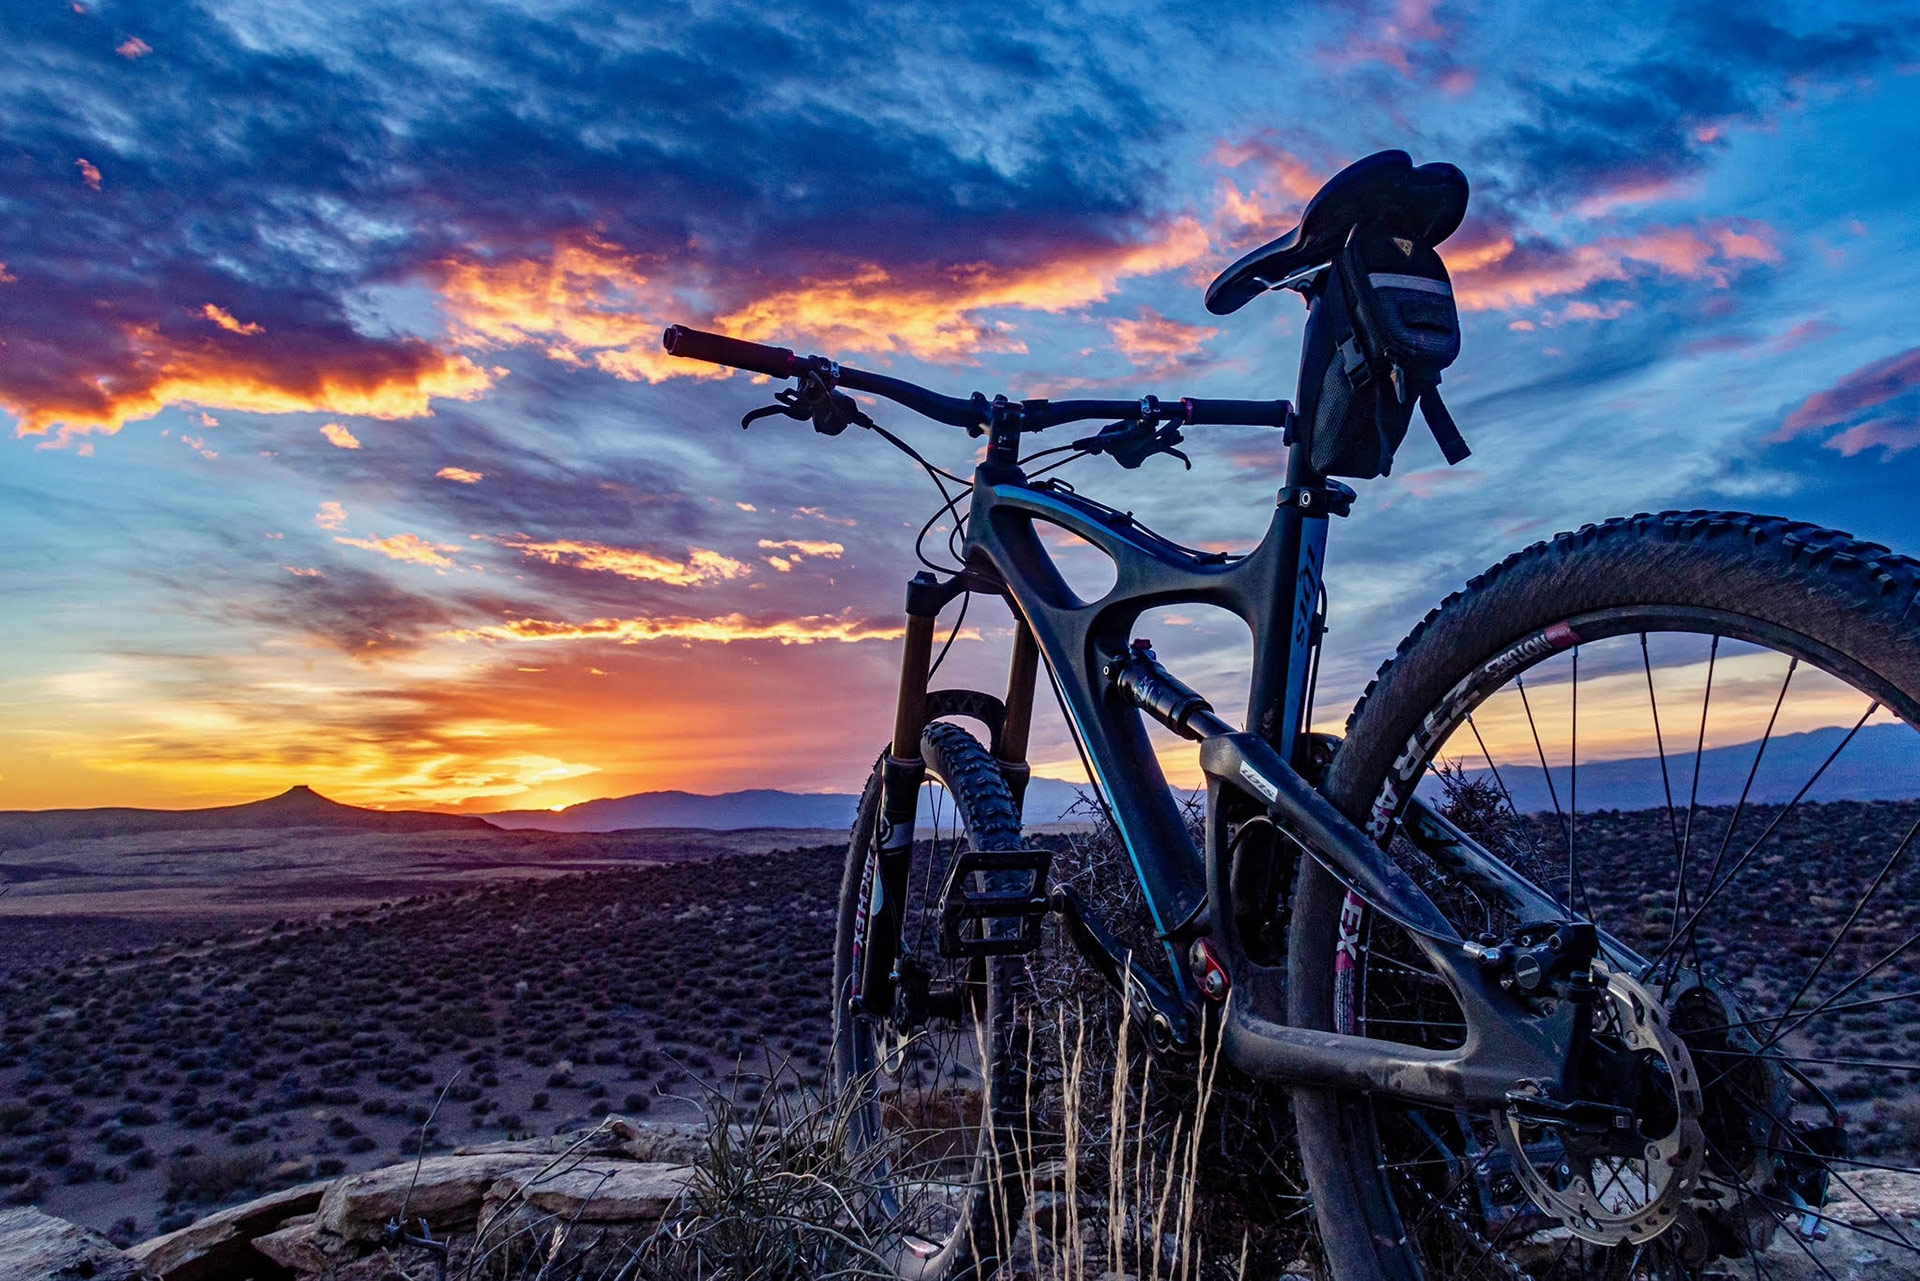 Mountain bike with sunset view